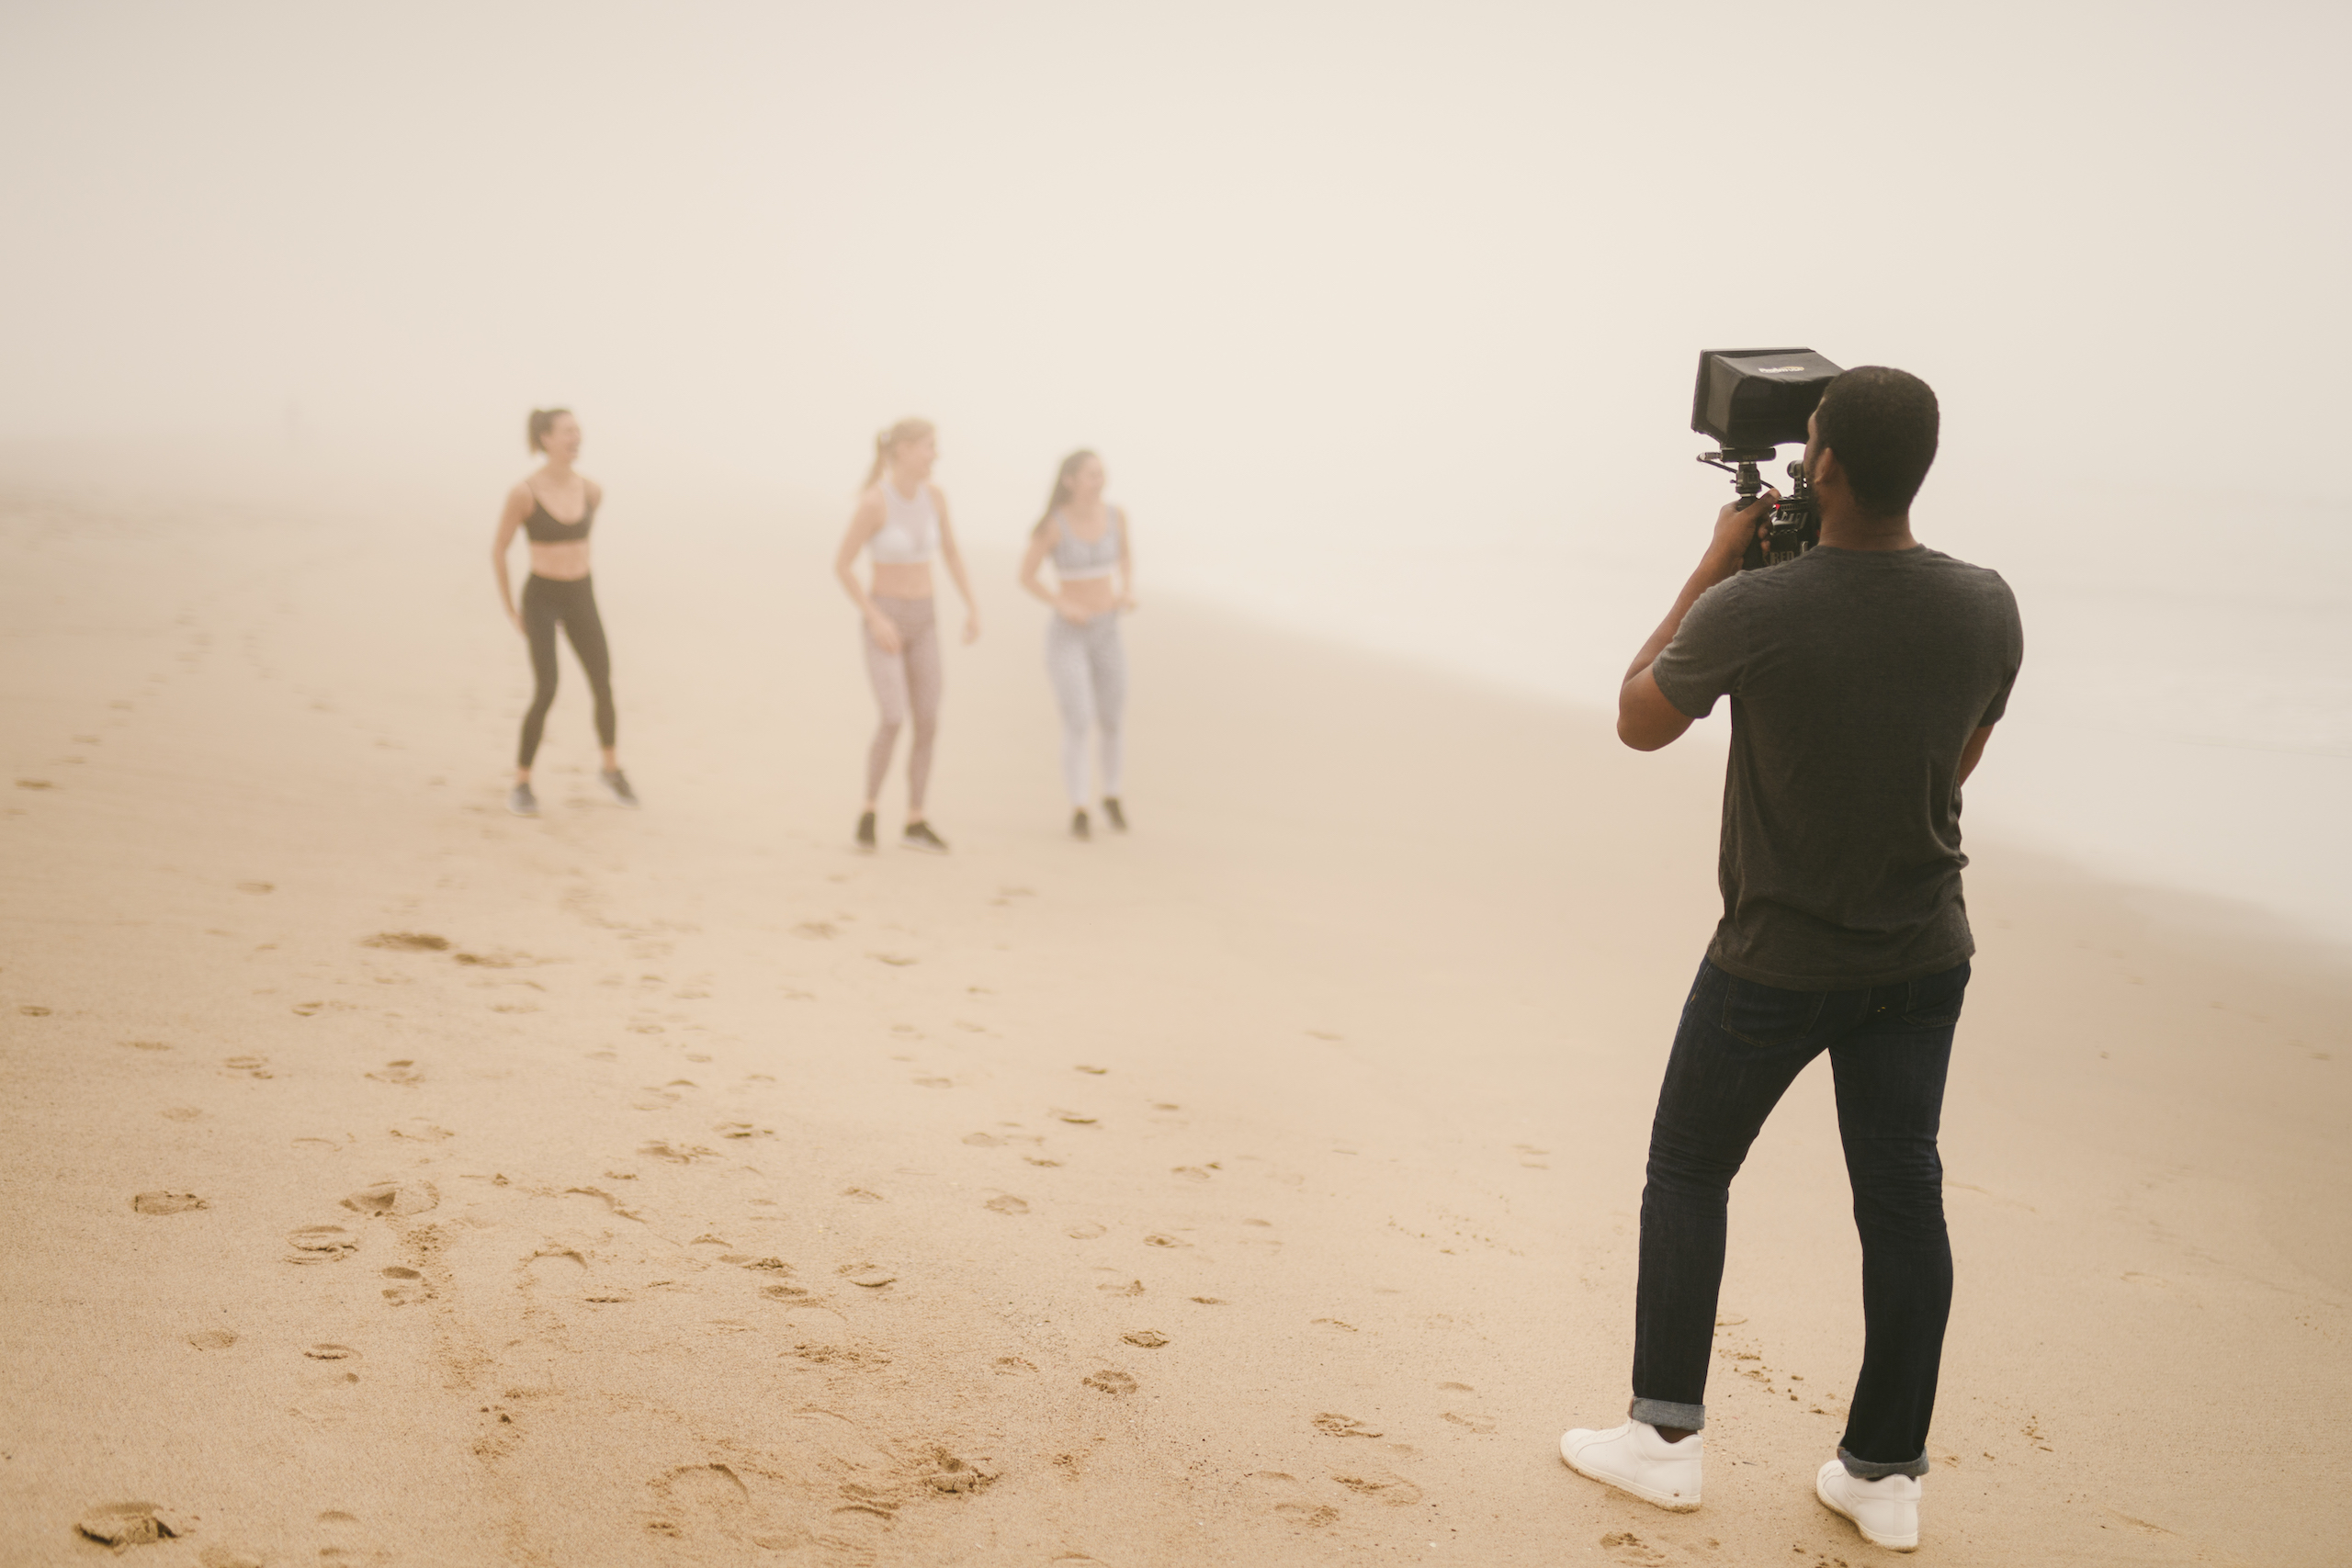 Health and Fitness Marketing Kinetix 365 Beach Exercises BTS Three women standing on the beach with a videographer filming them